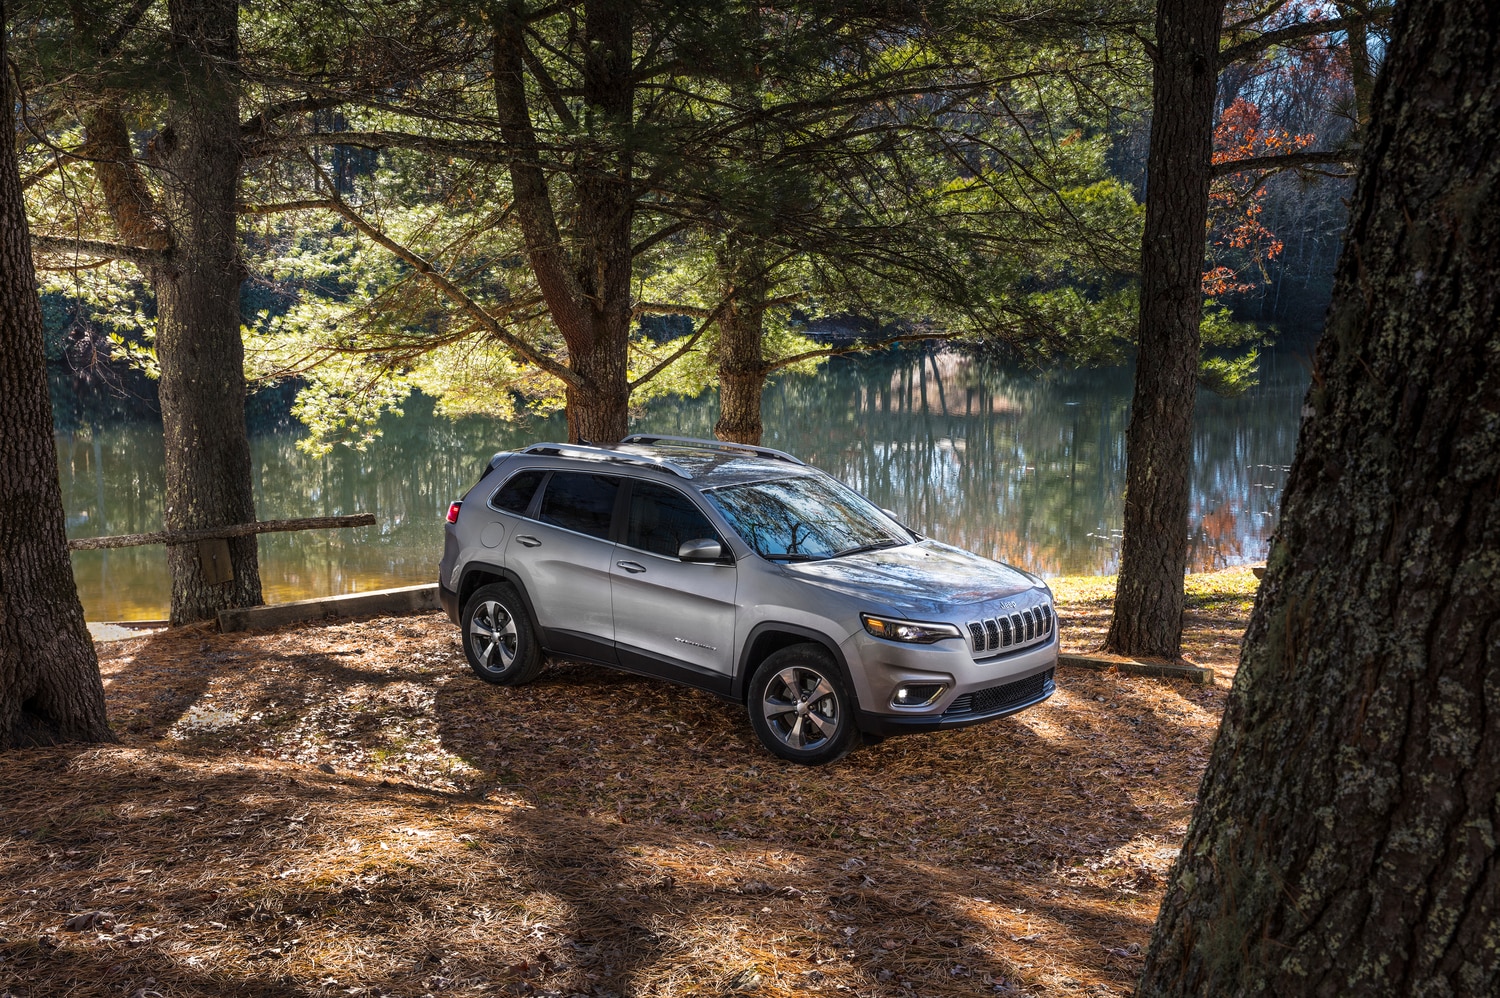 silver Jeep Cherokee SUV parked in a wooded area